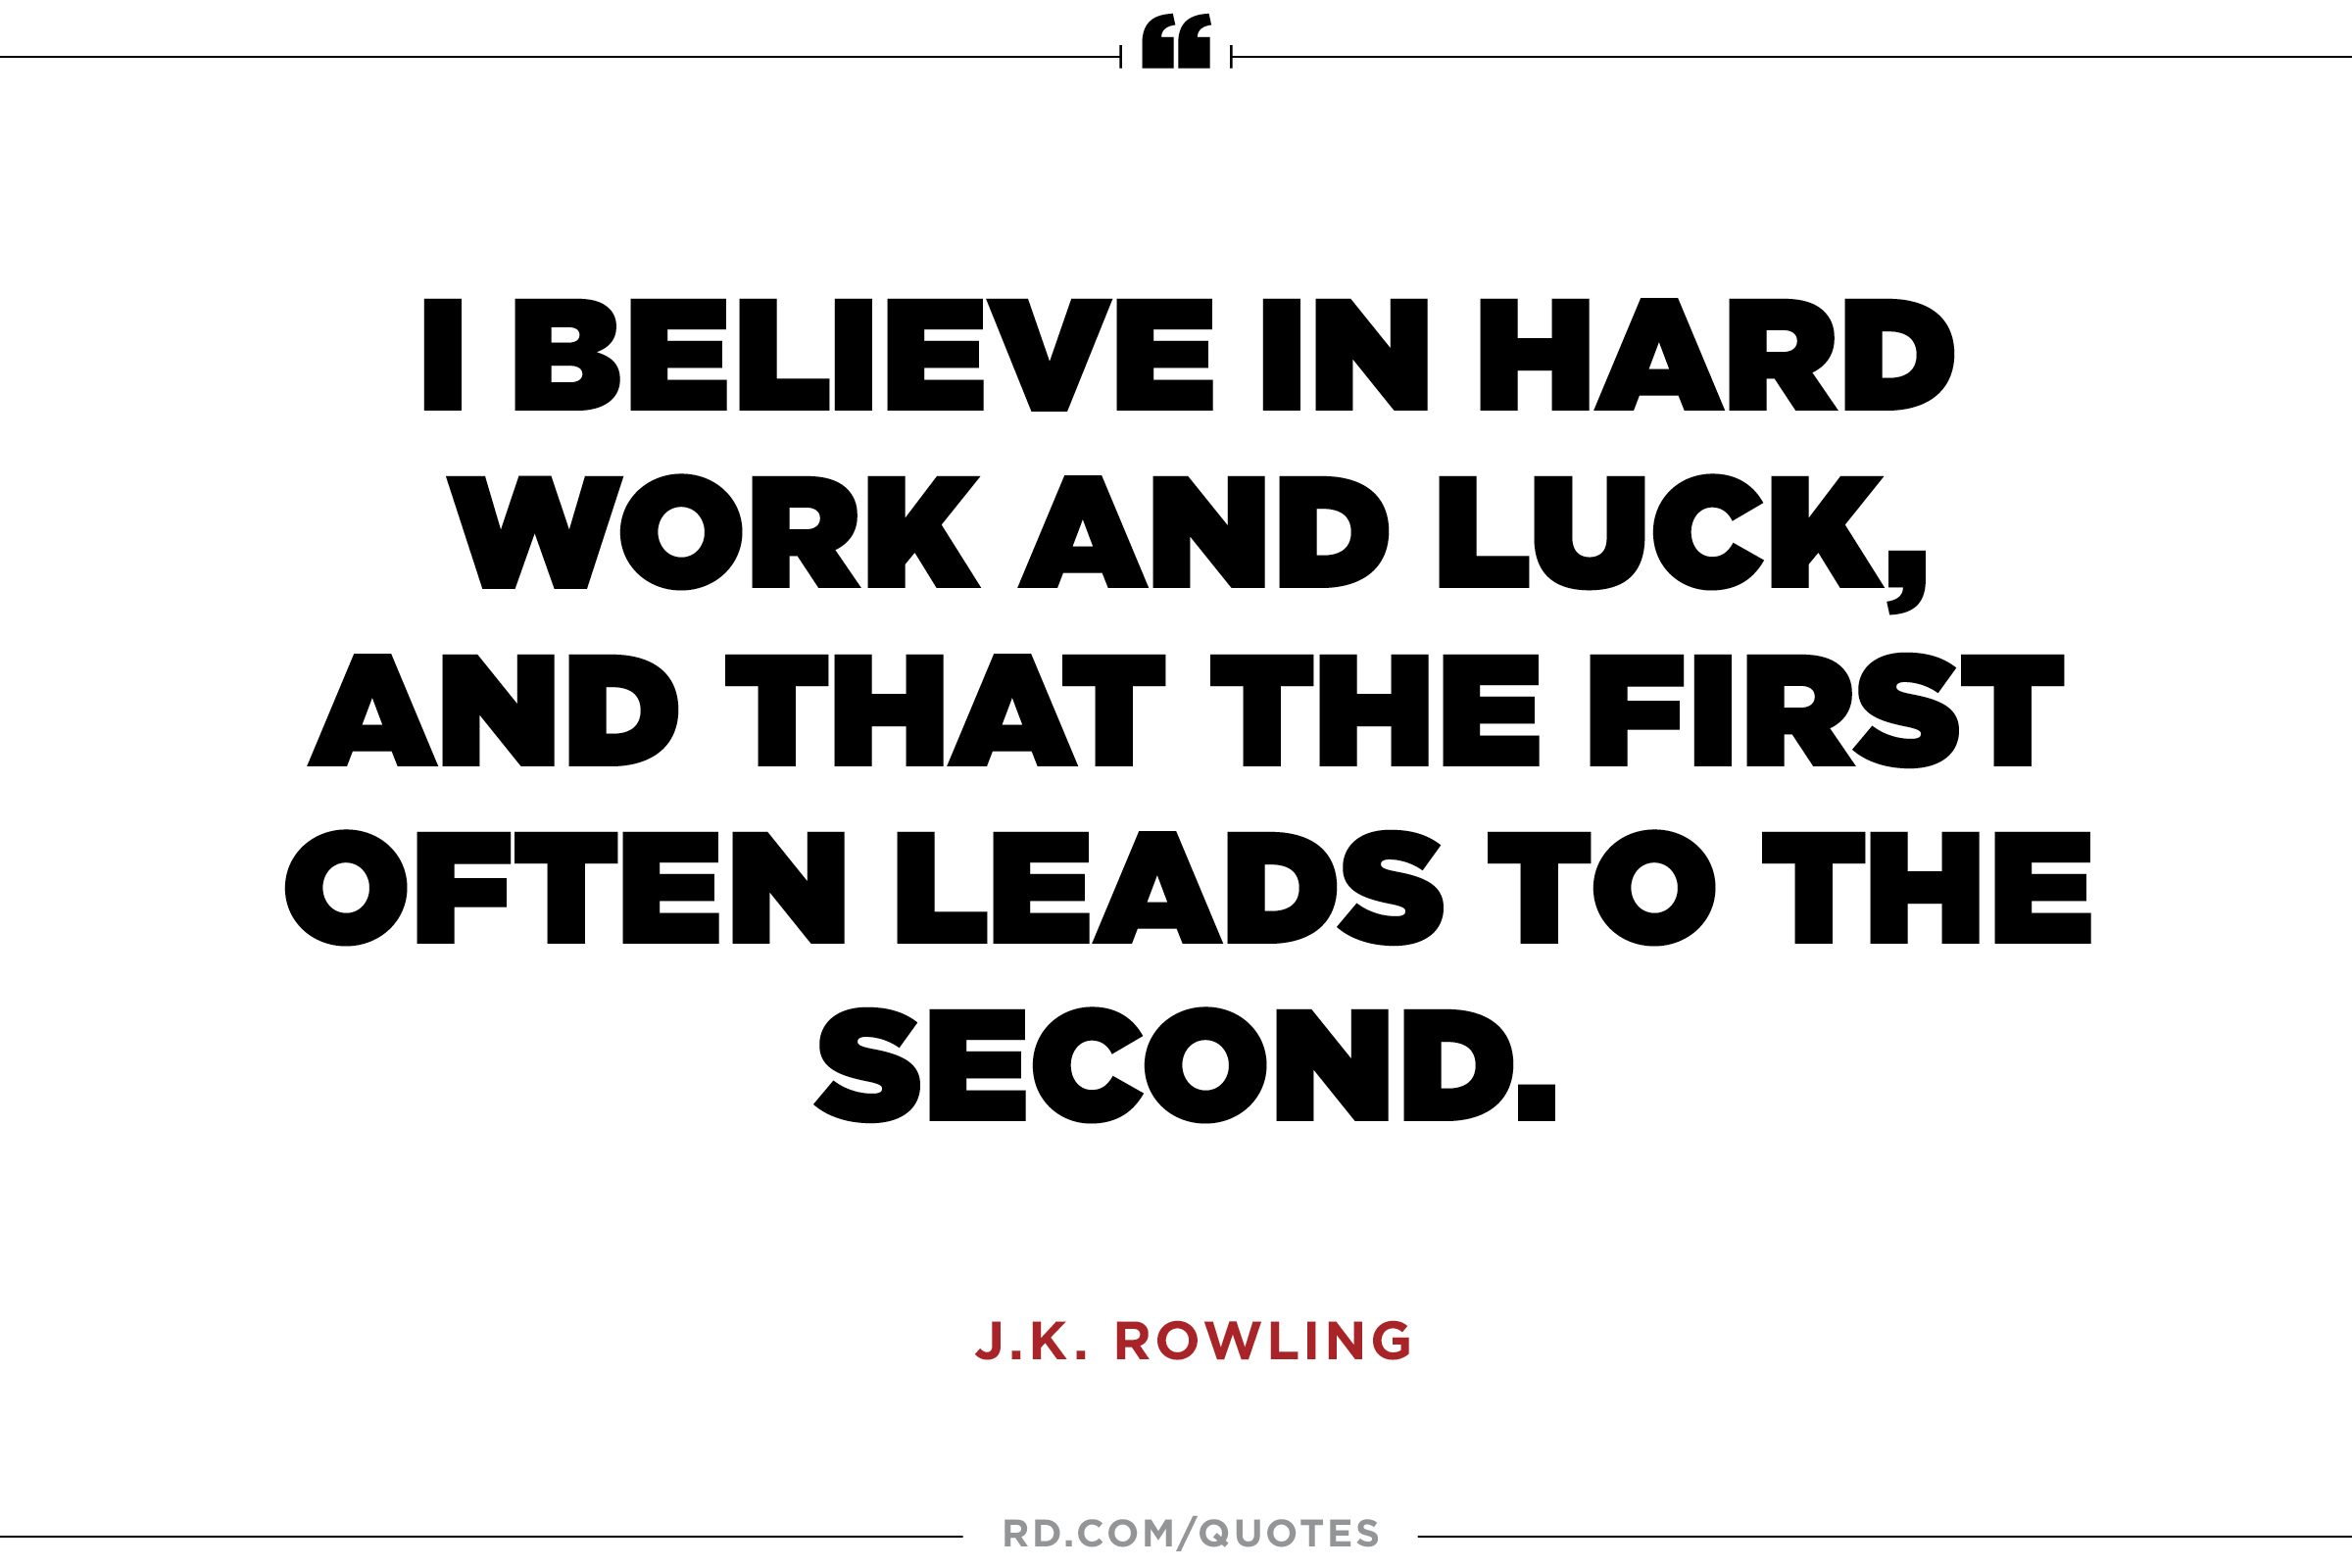 8 J.K. Rowling Quotes to Motivate You Through Any Slump